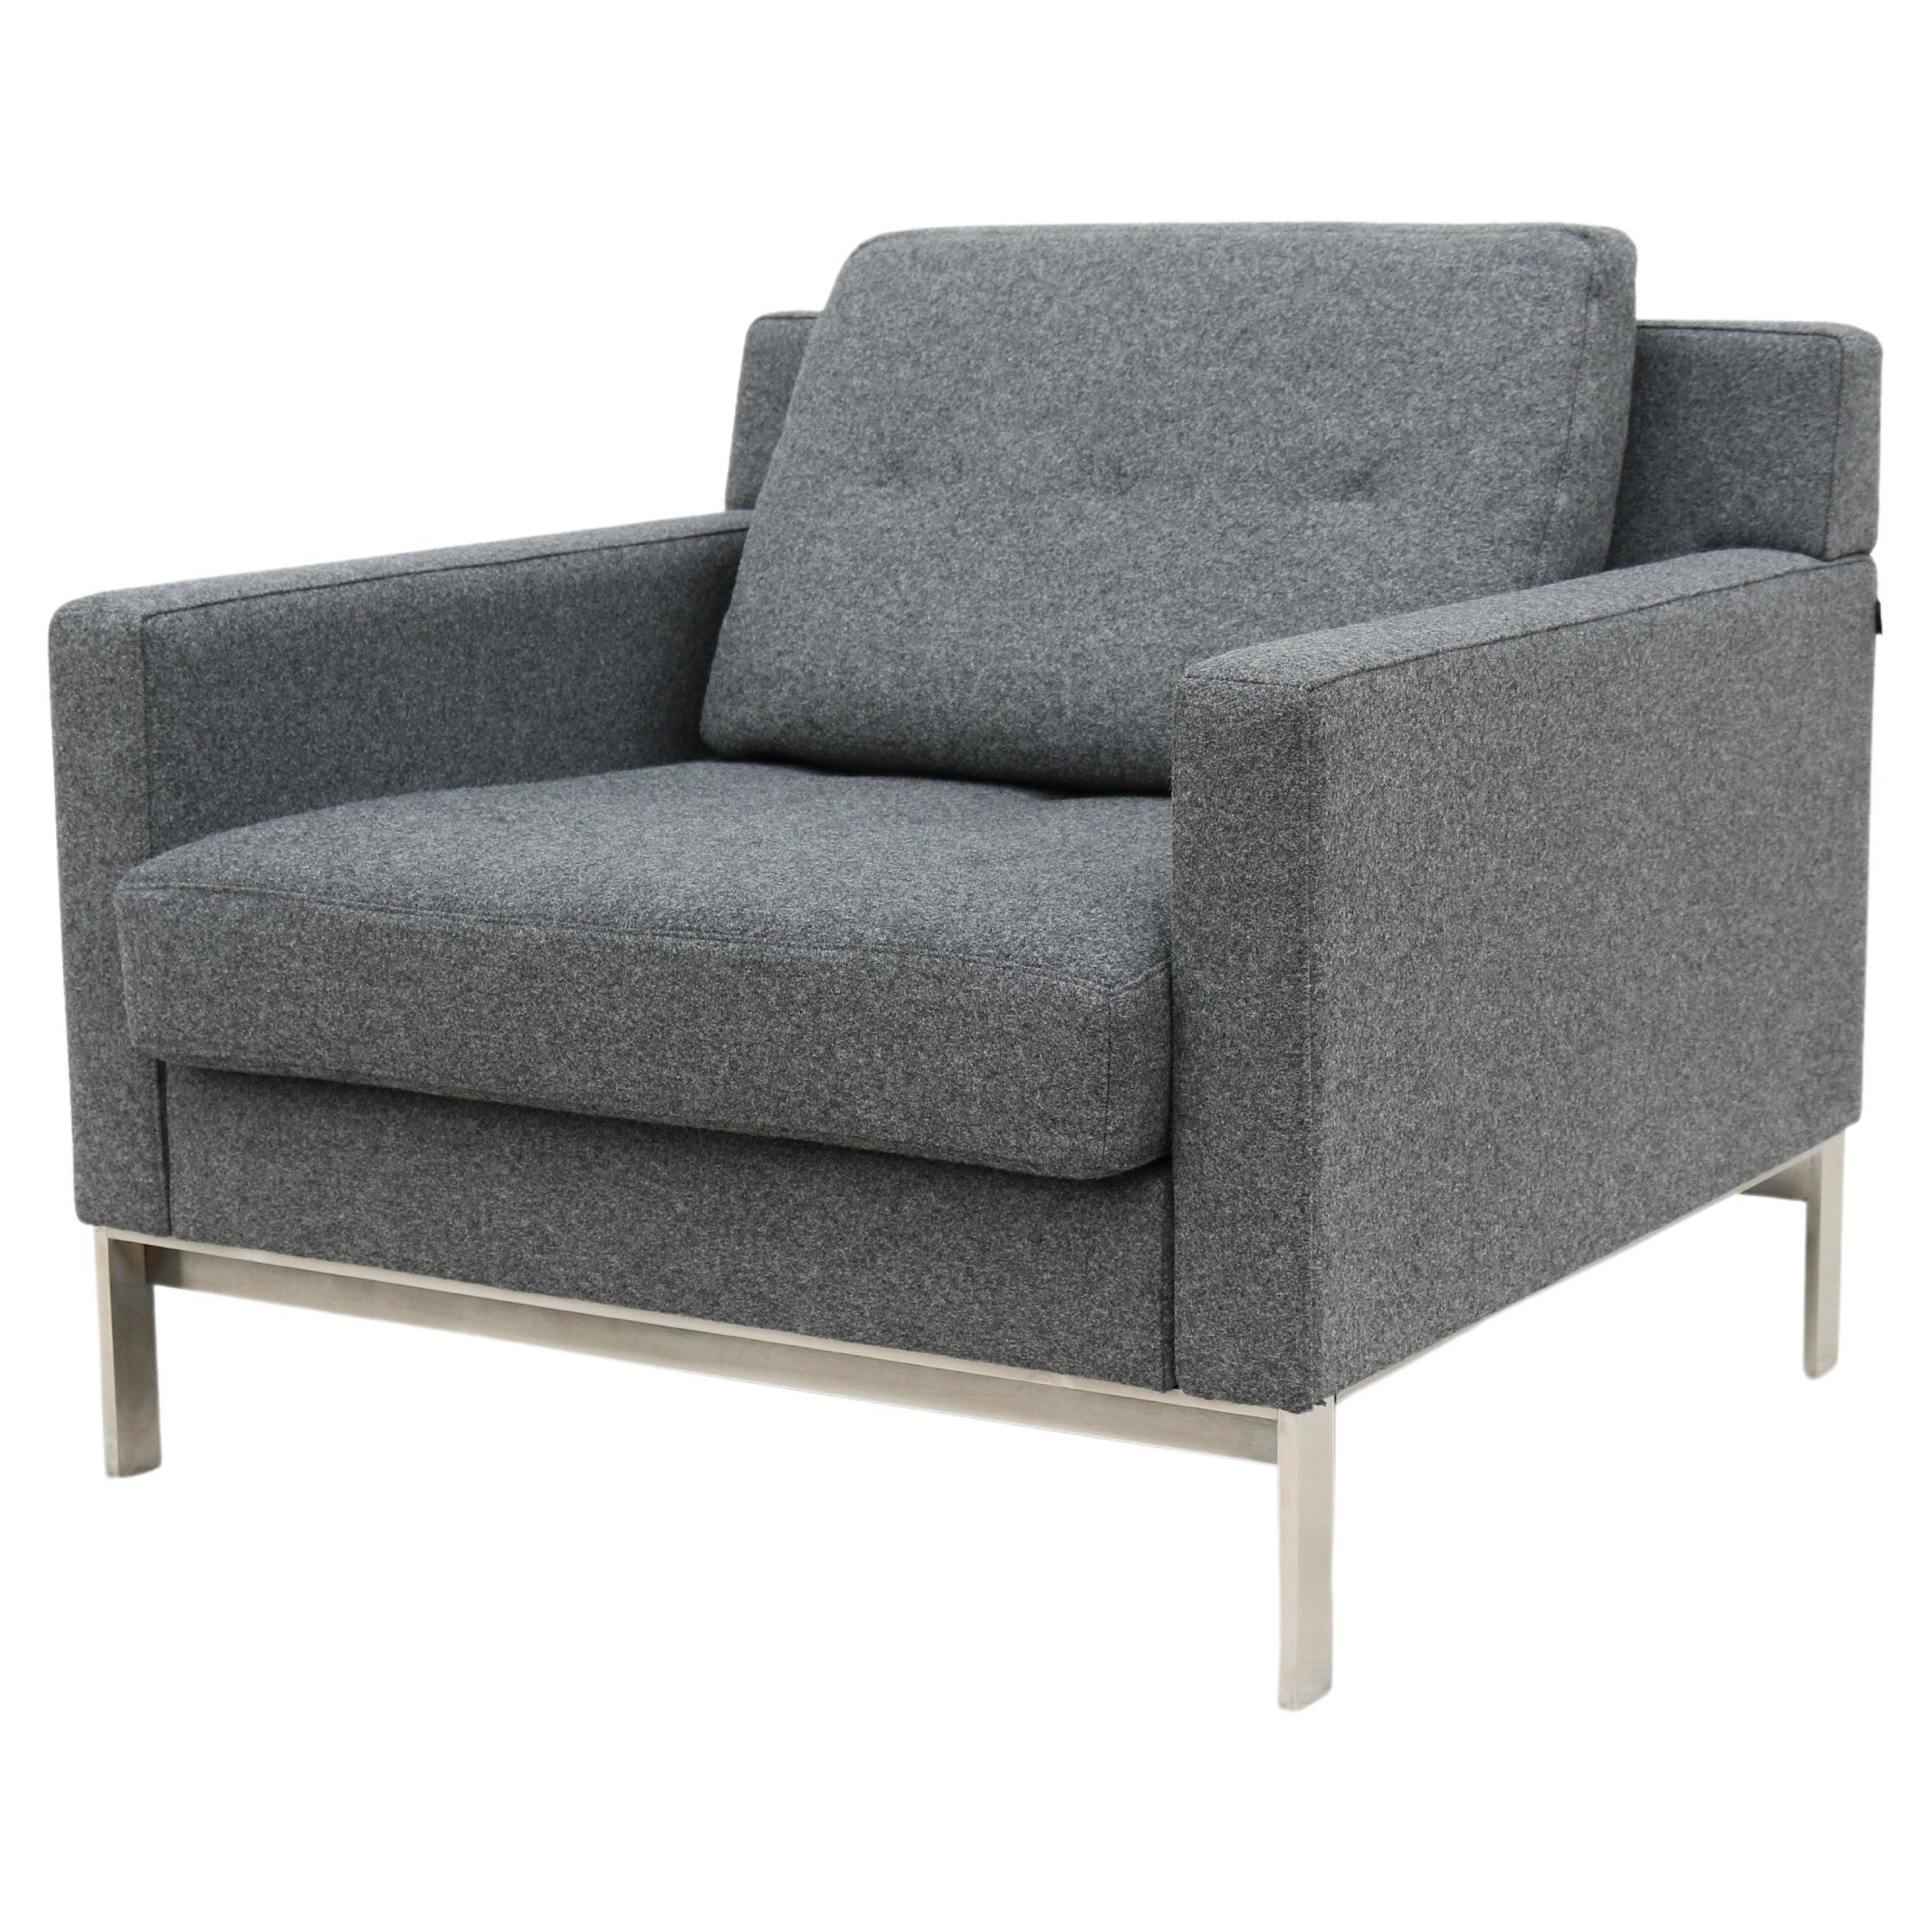 Mid-Century Modern Style Coalesse Millbrae Lifestyle Gray Wool Lounge Chair For Sale